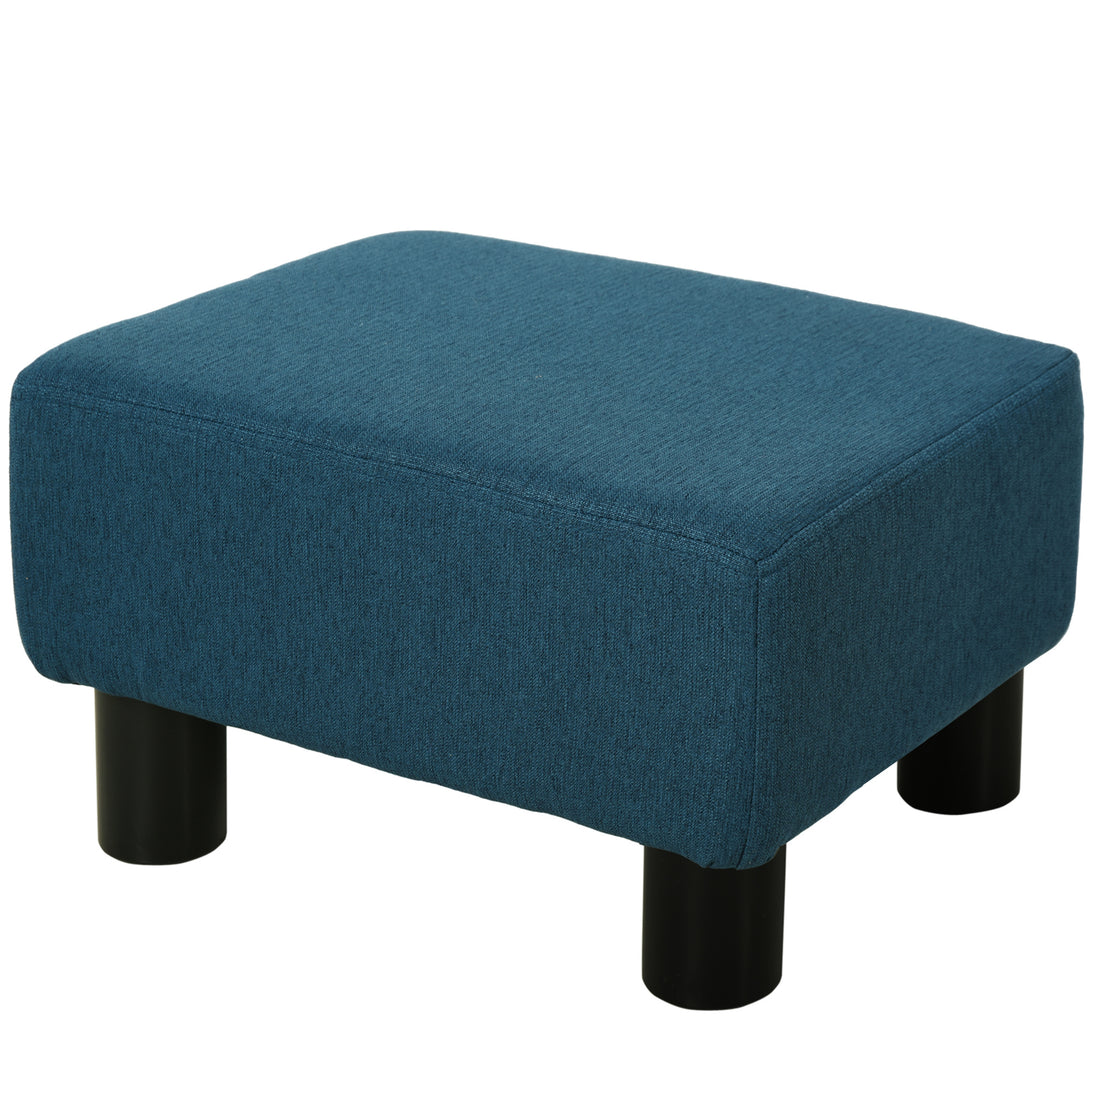 Ottoman Foot Rest, Small Foot Stool with Linen